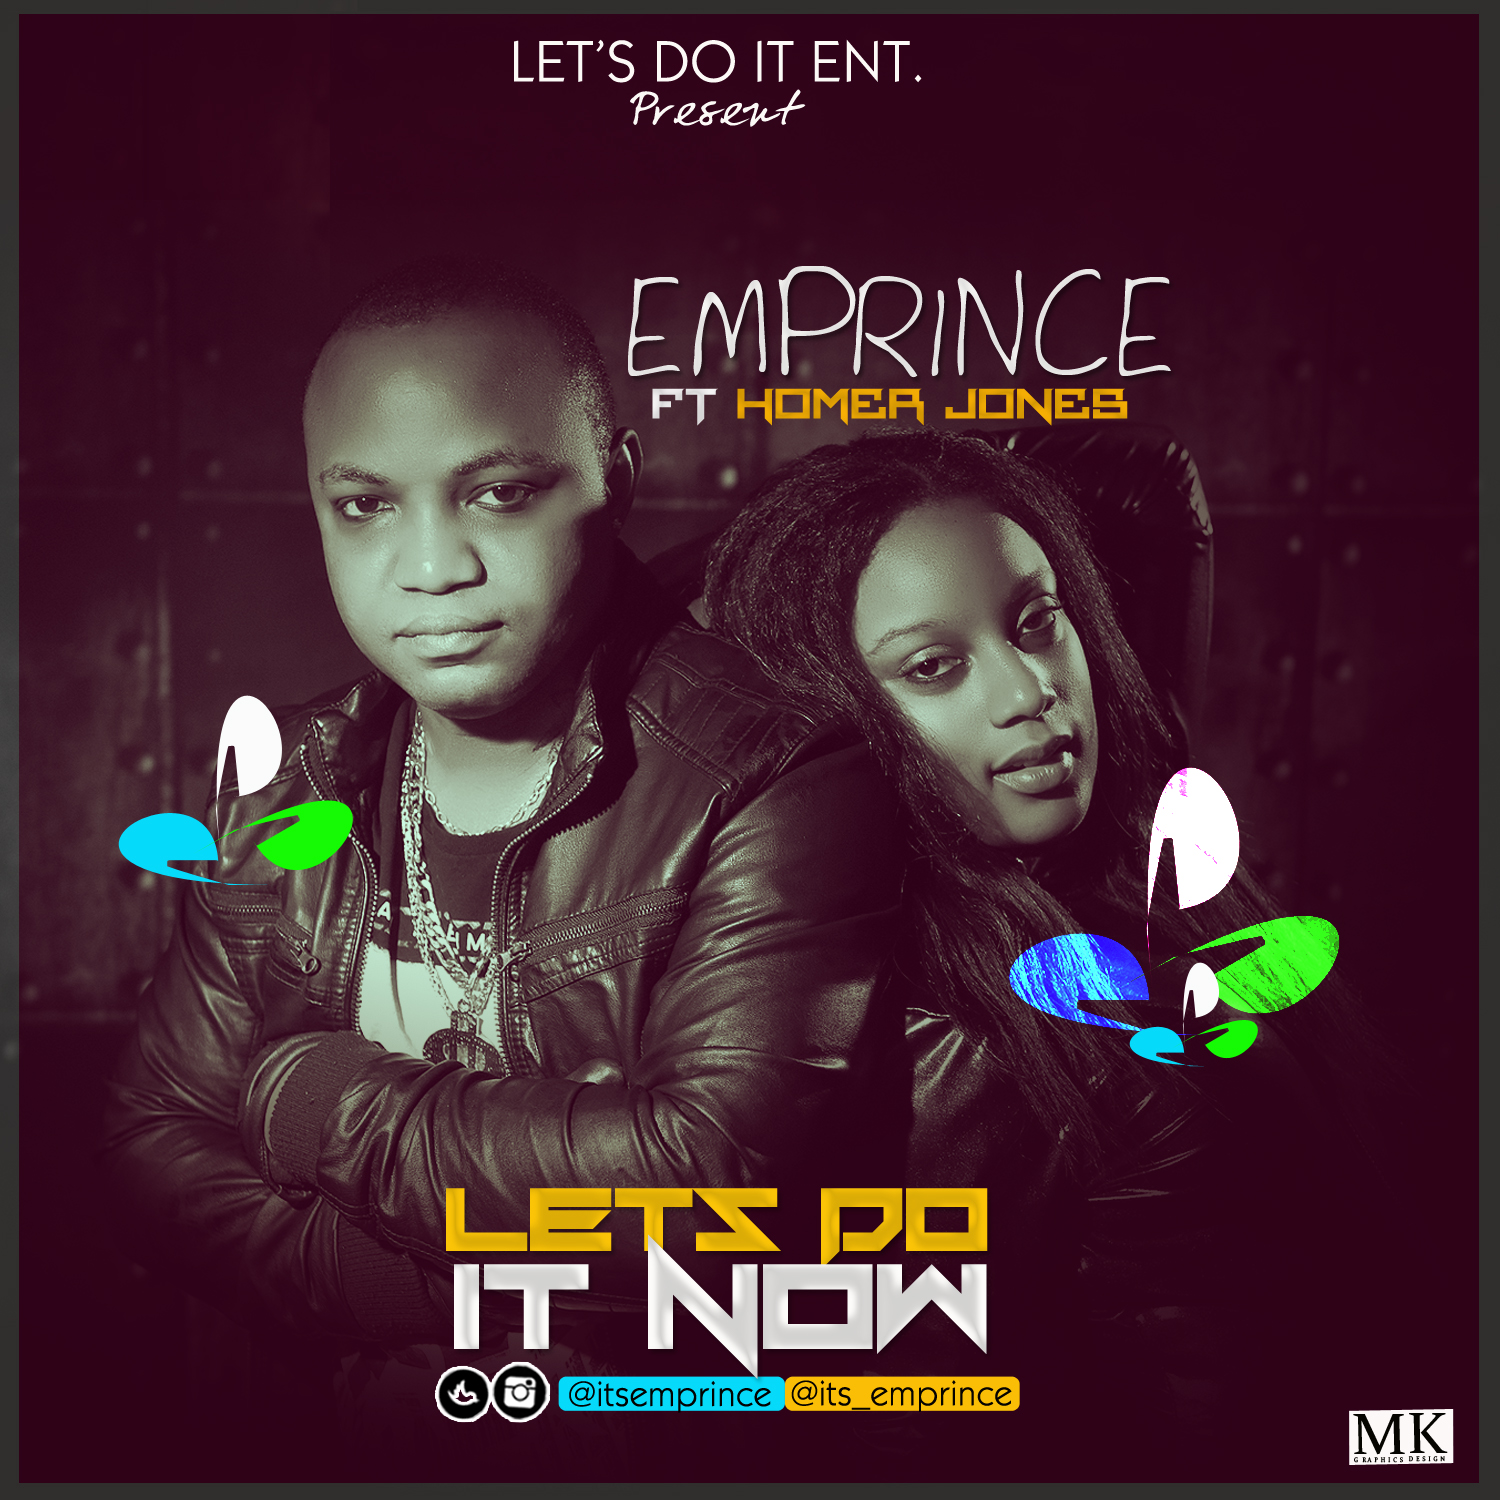 Emprince “lets Do It Now” 4537